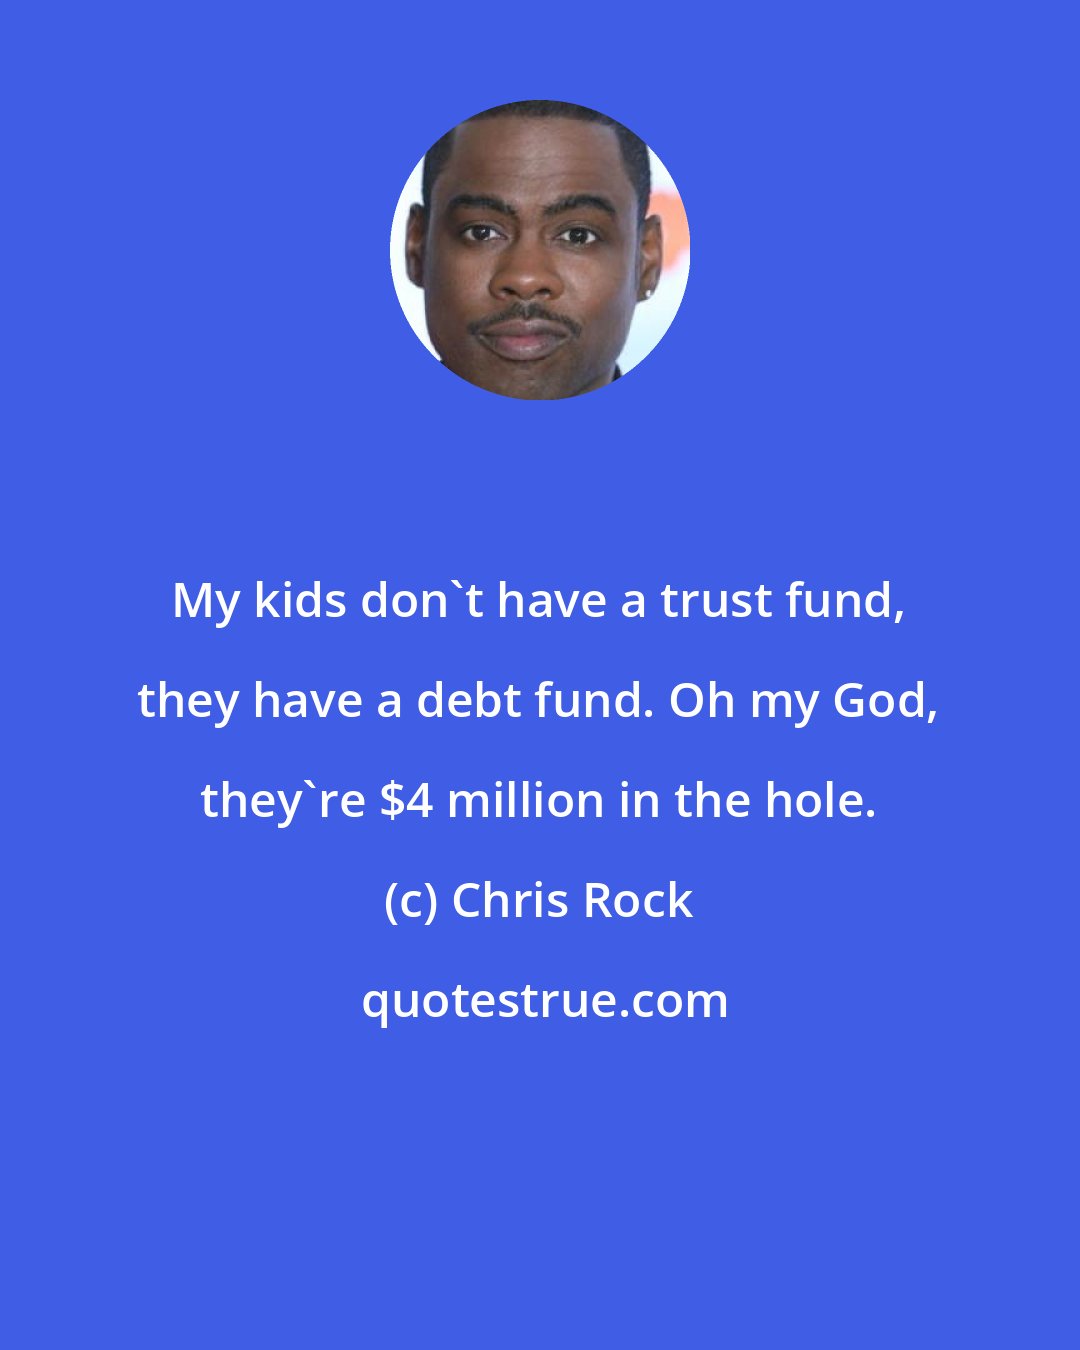 Chris Rock: My kids don't have a trust fund, they have a debt fund. Oh my God, they're $4 million in the hole.